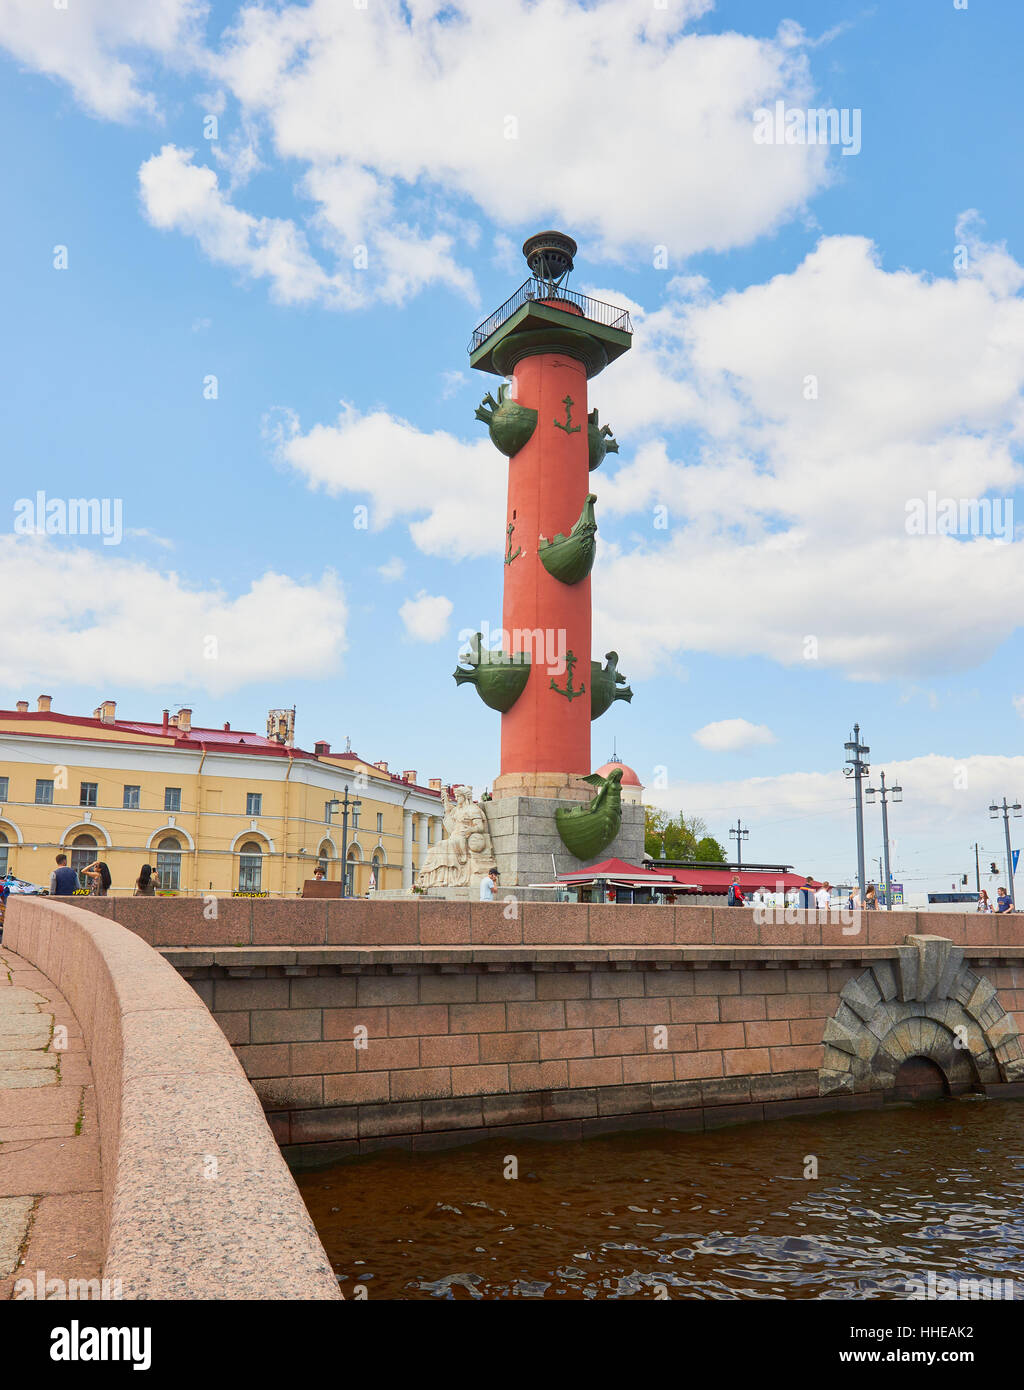 One of the Rostral Columns designed in 1810 by Thomas De Thomon as lighthouses, Vasilevskiy Island, St Petersburg Russia Stock Photo